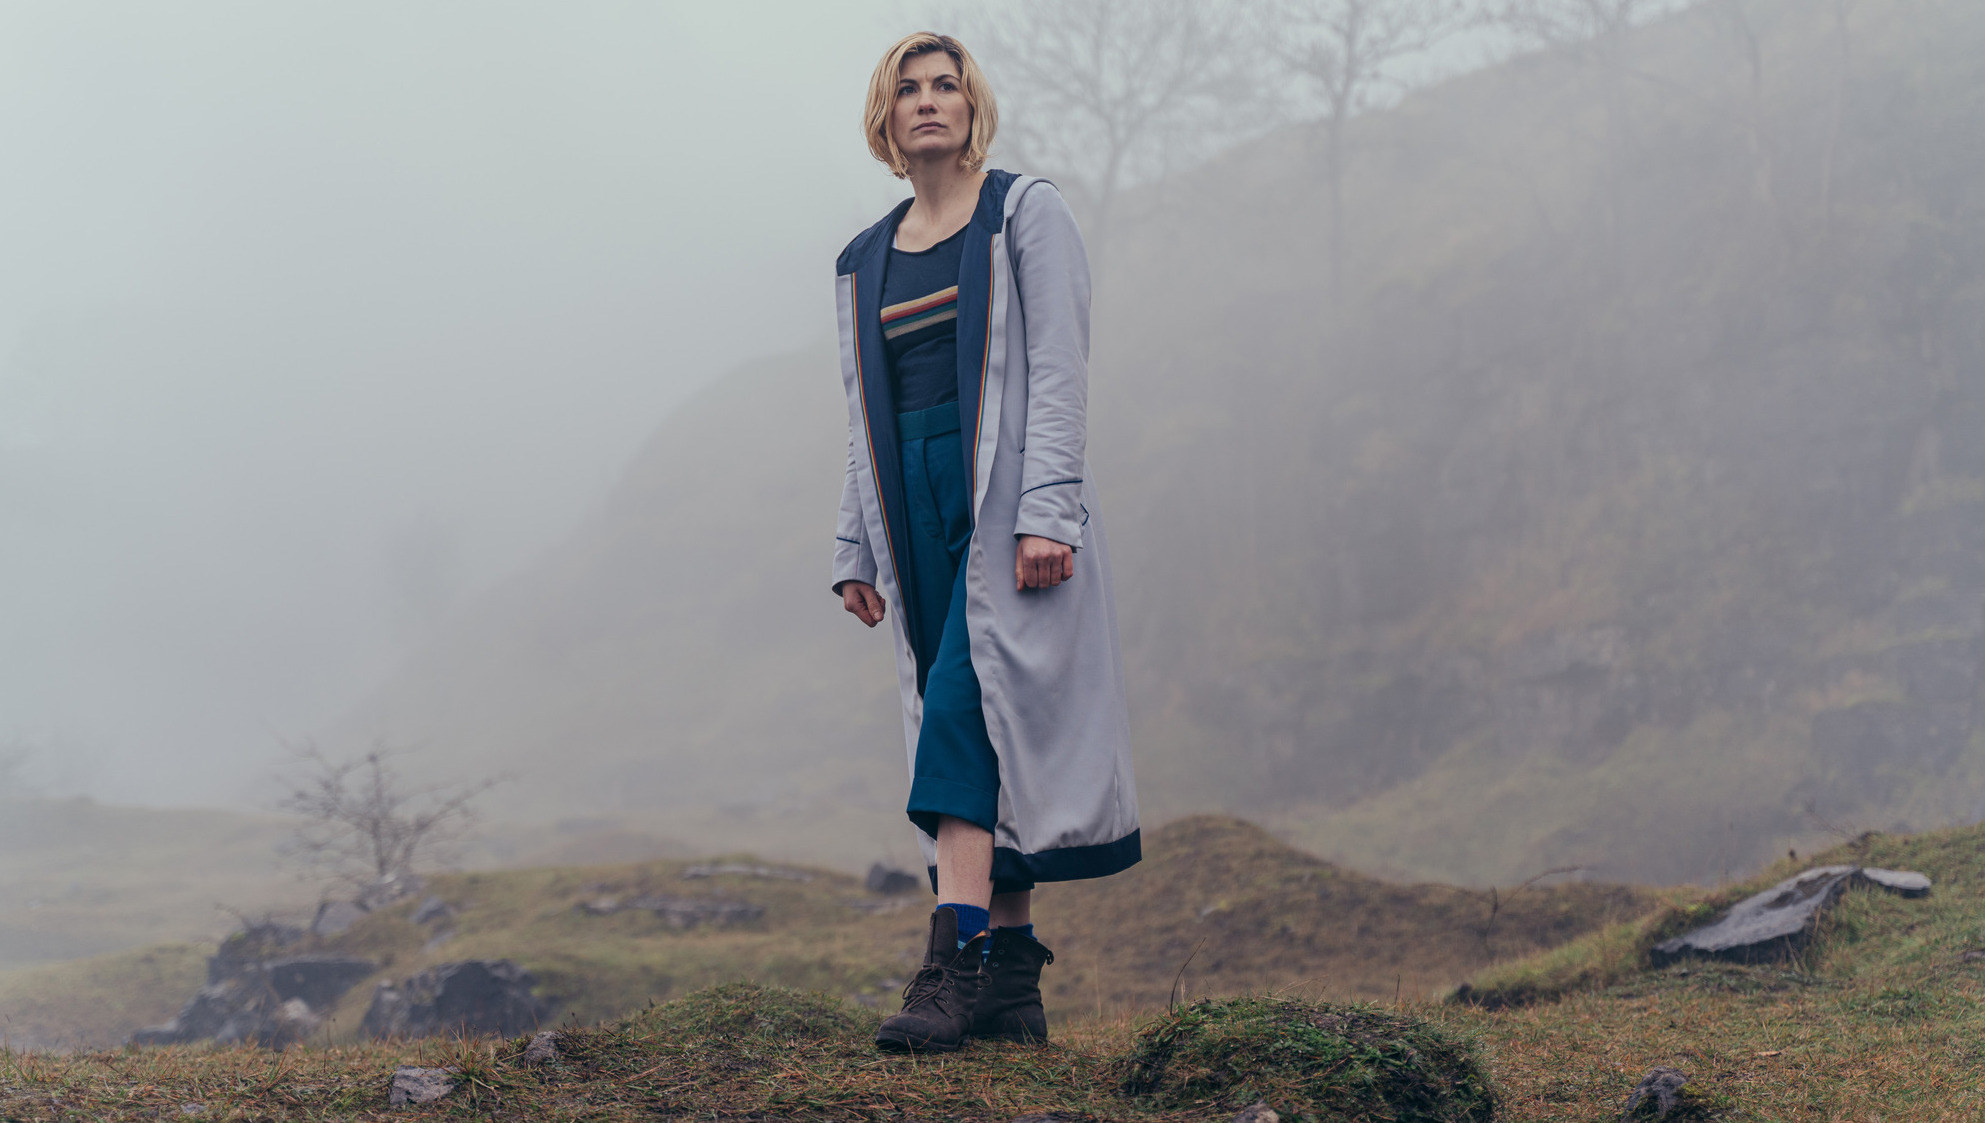 Jodie Whittaker as the Doctor stands on a rock in a long grey coat amongst a foggy rural setting